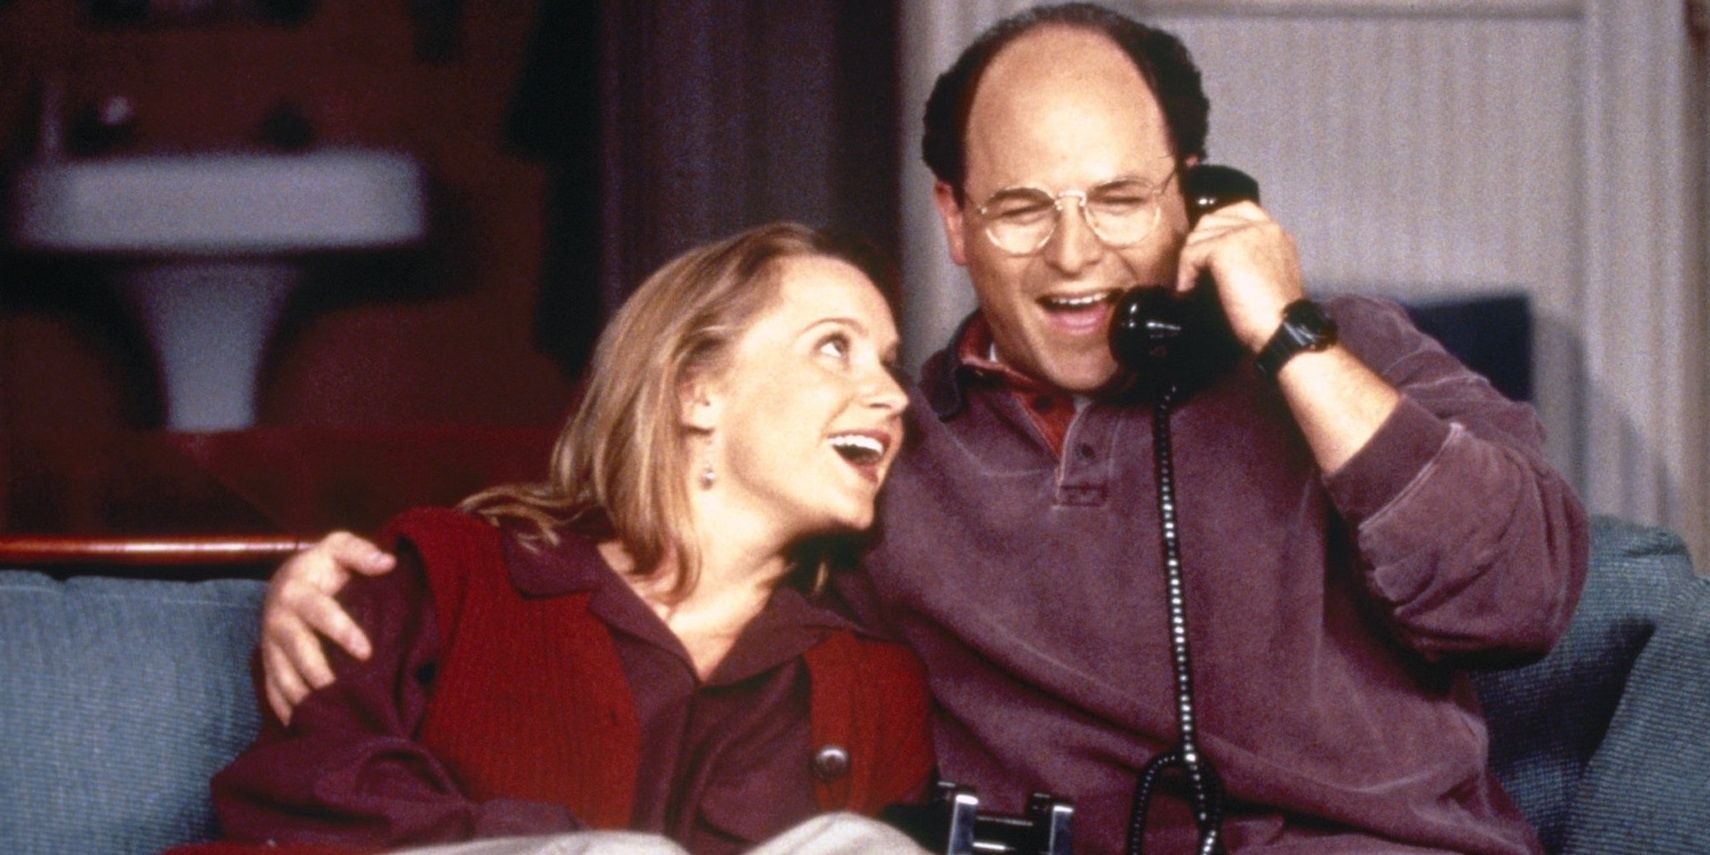 On a couch, George talks on a phone while Susan smiles in Seinfeld.